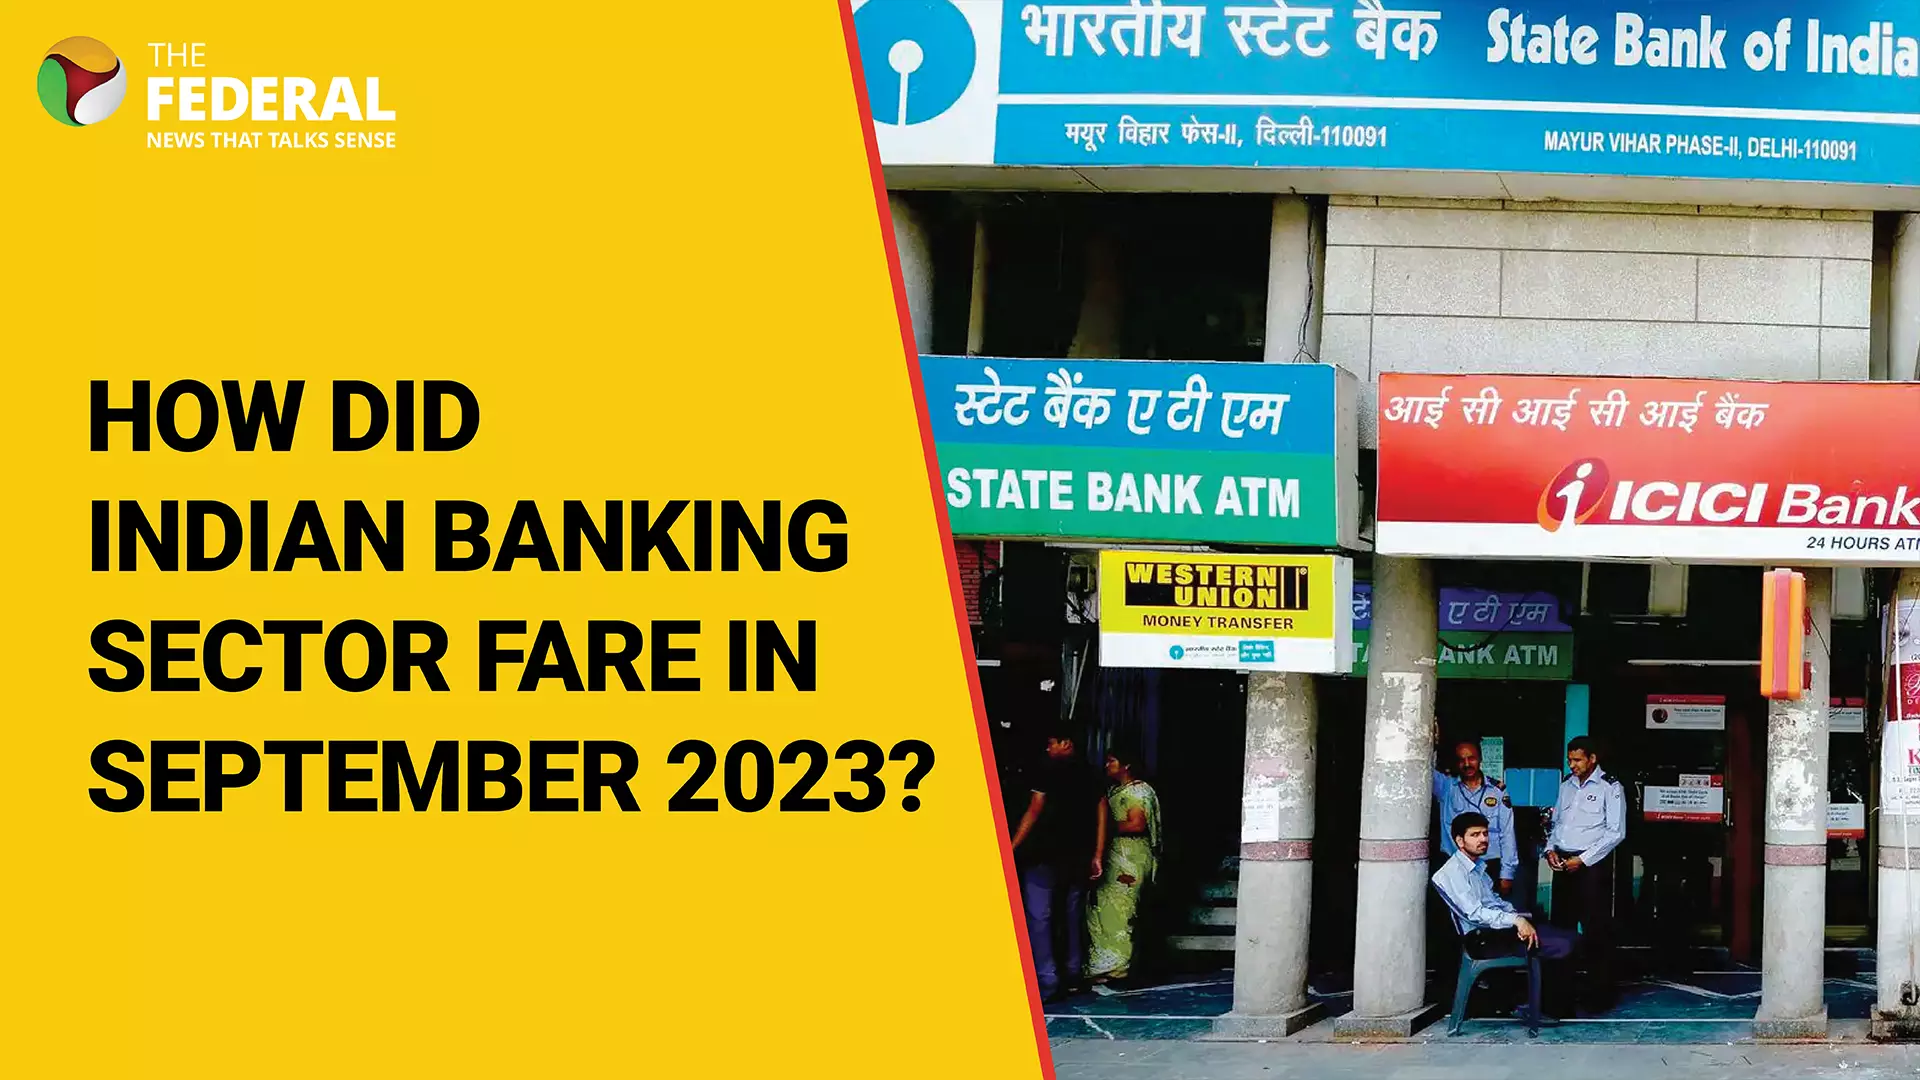 How did Indian banking sector fare in September 2023?